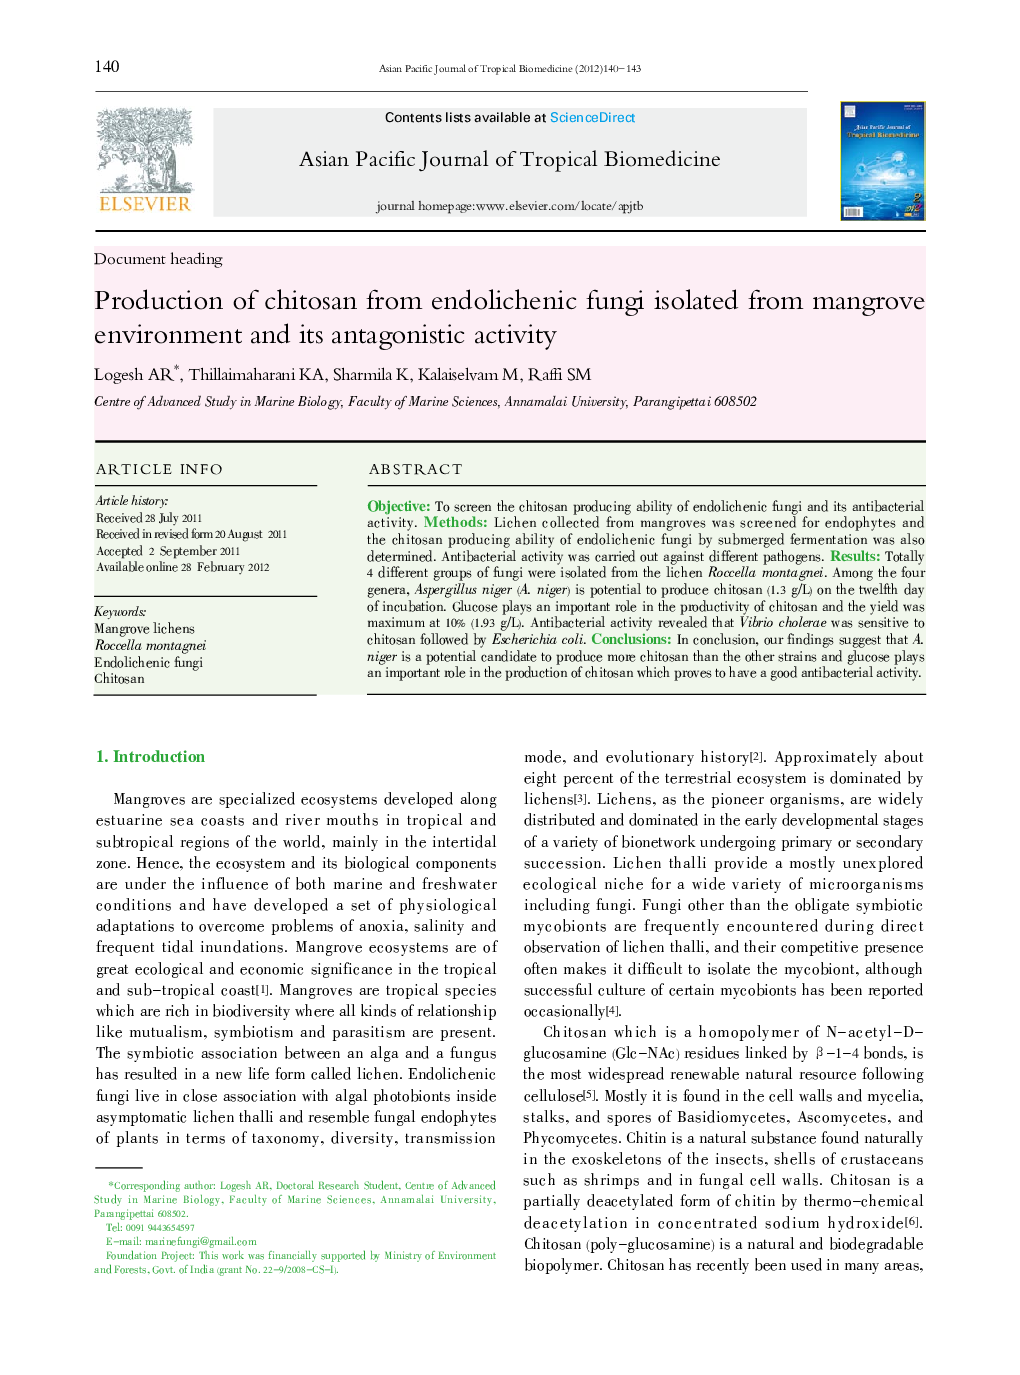 Production of chitosan from endolichenic fungi isolated from mangrove environment and its antagonistic activity